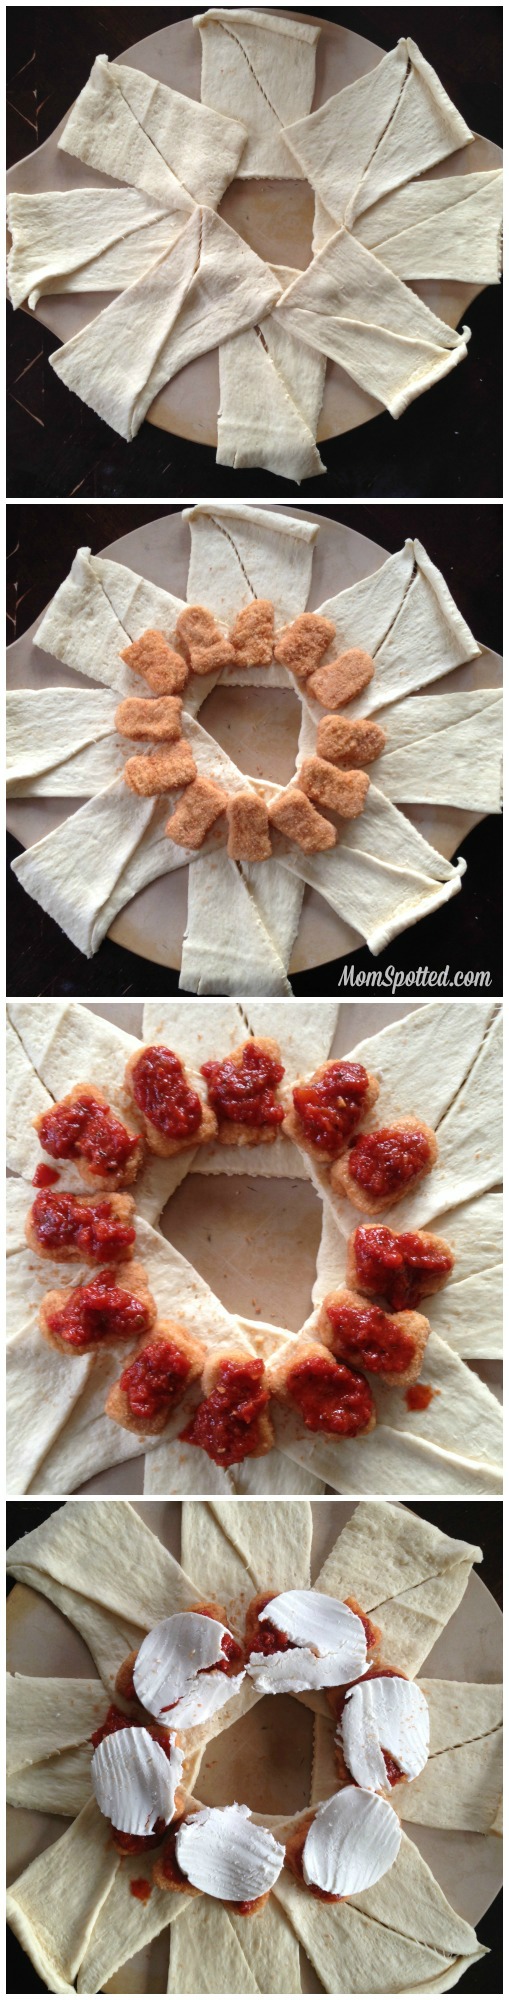 Kid Friendly Chicken Nugget Parmesan Ring Recipe found on MomSpotted.com